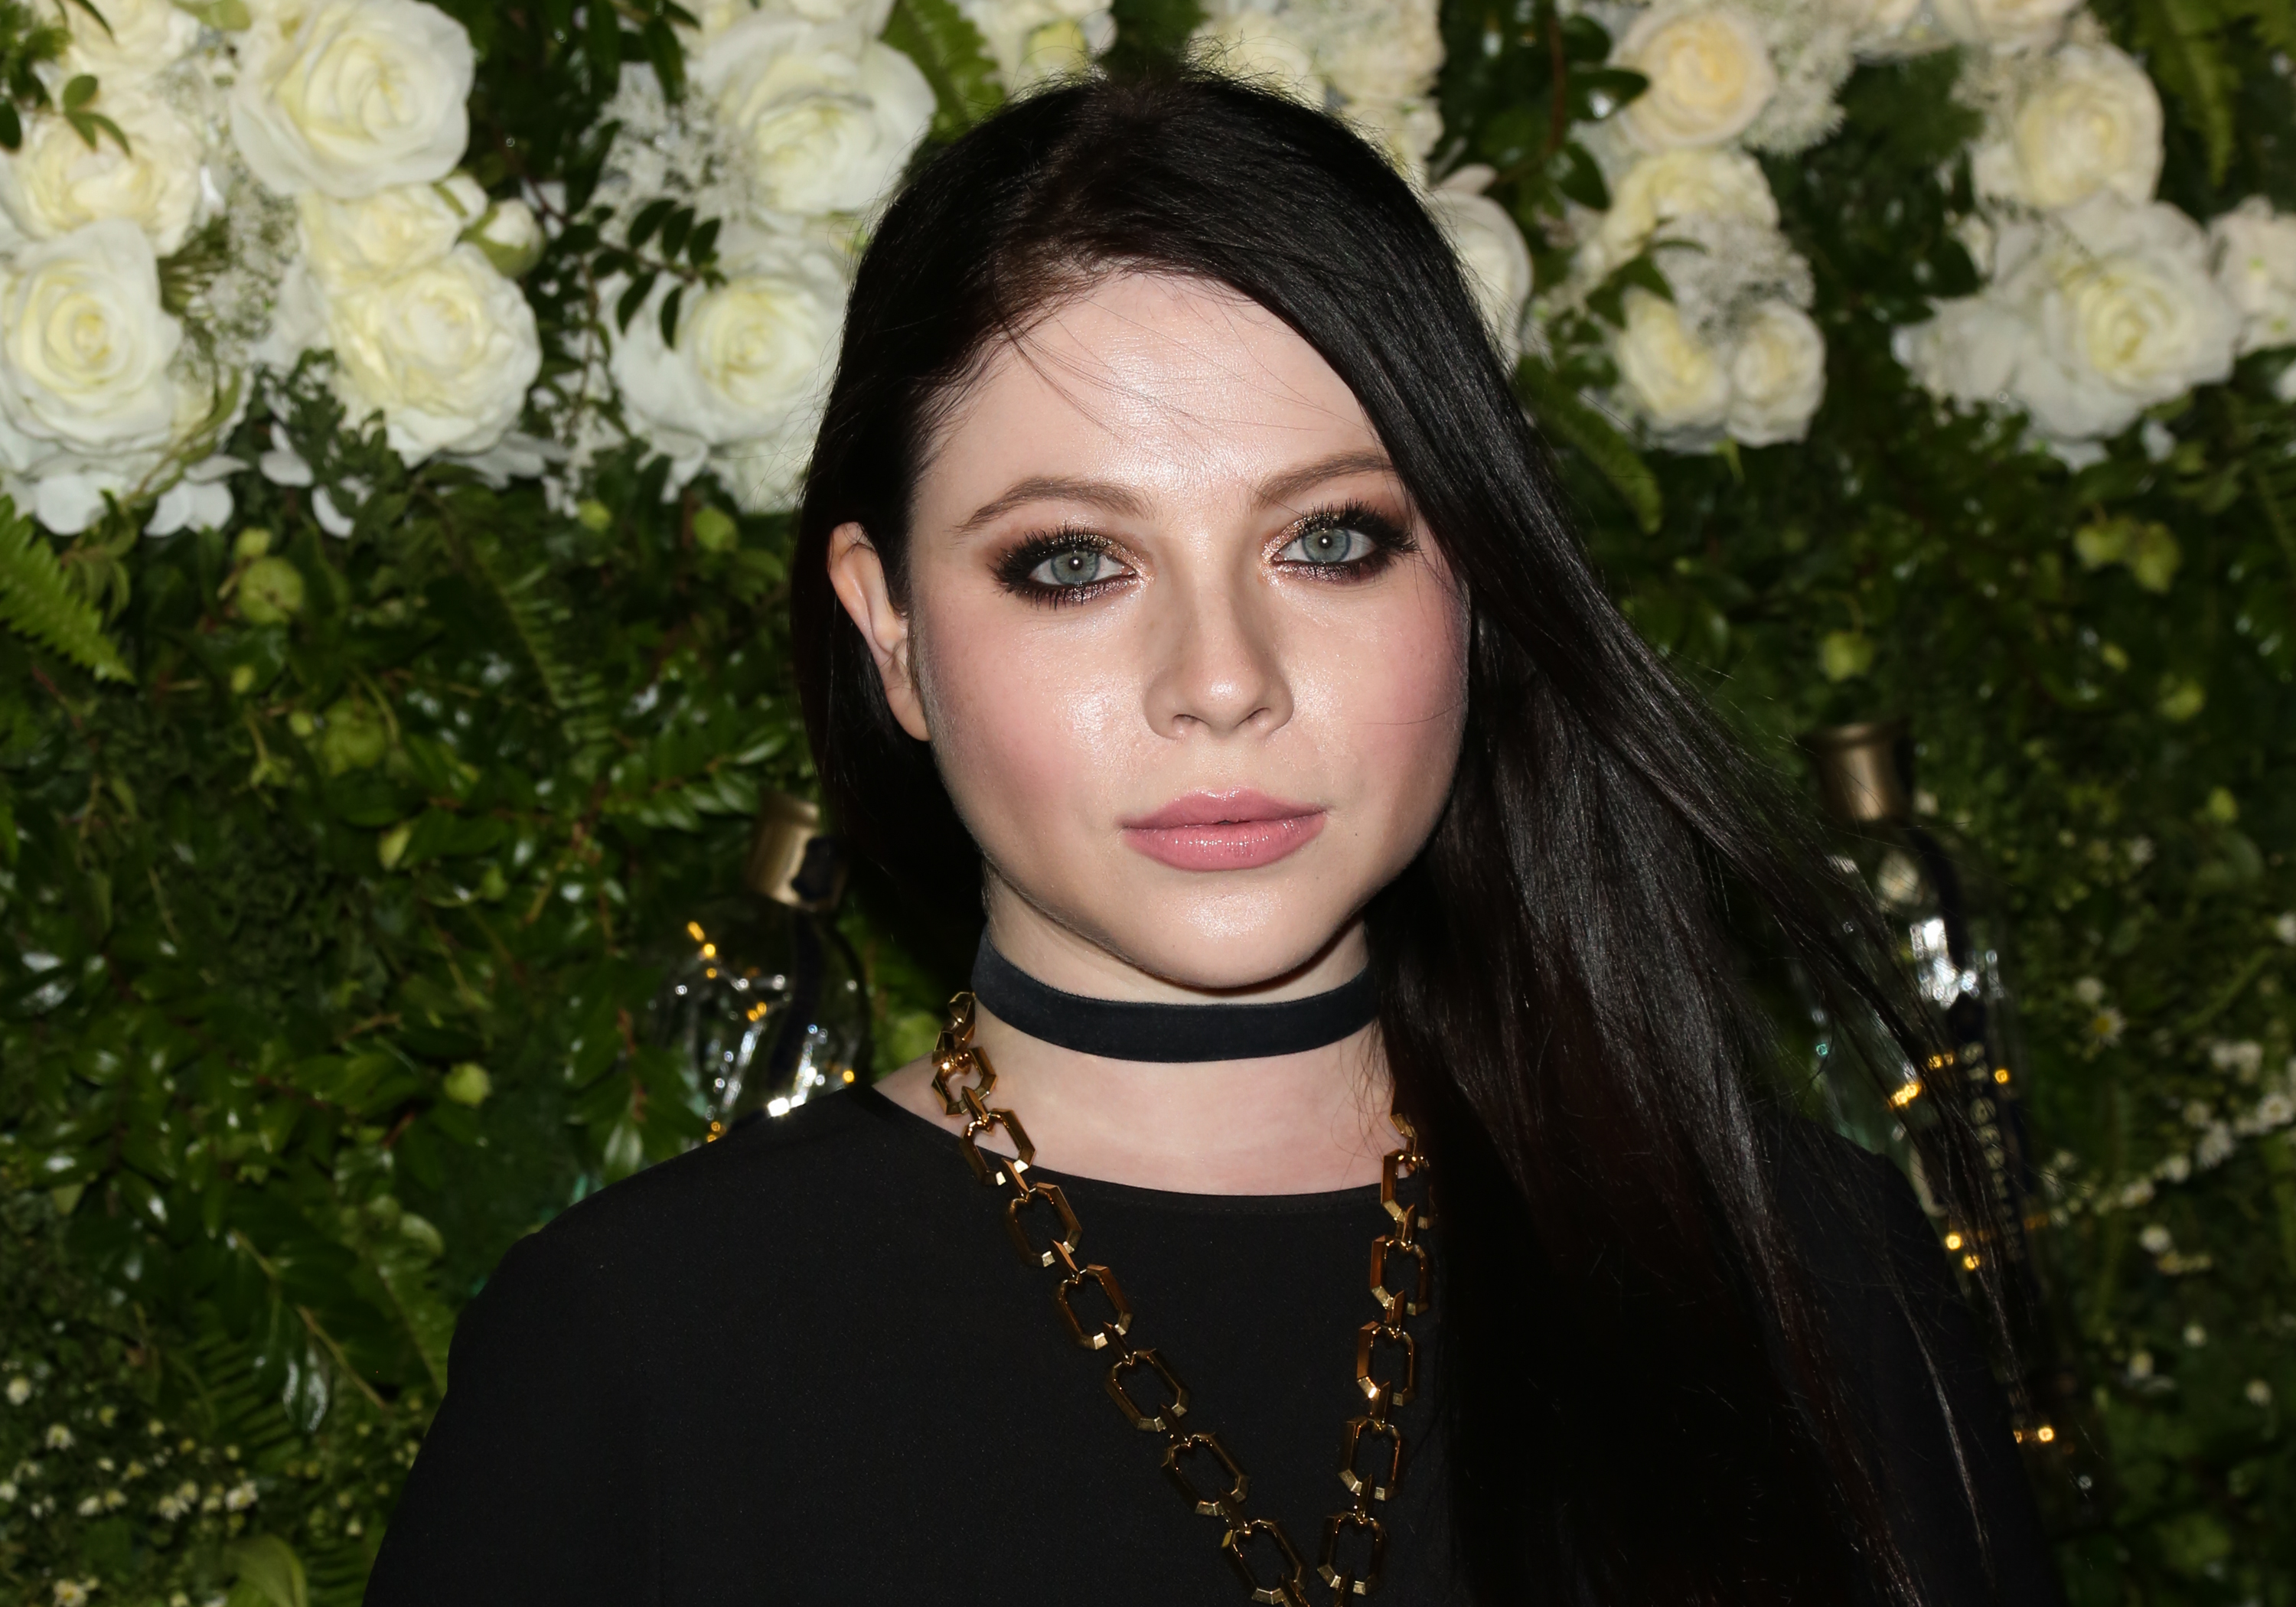 Michelle Trachtenberg wears a black dress and a large gold chain while posing for photographers at Maison St-Germain LA